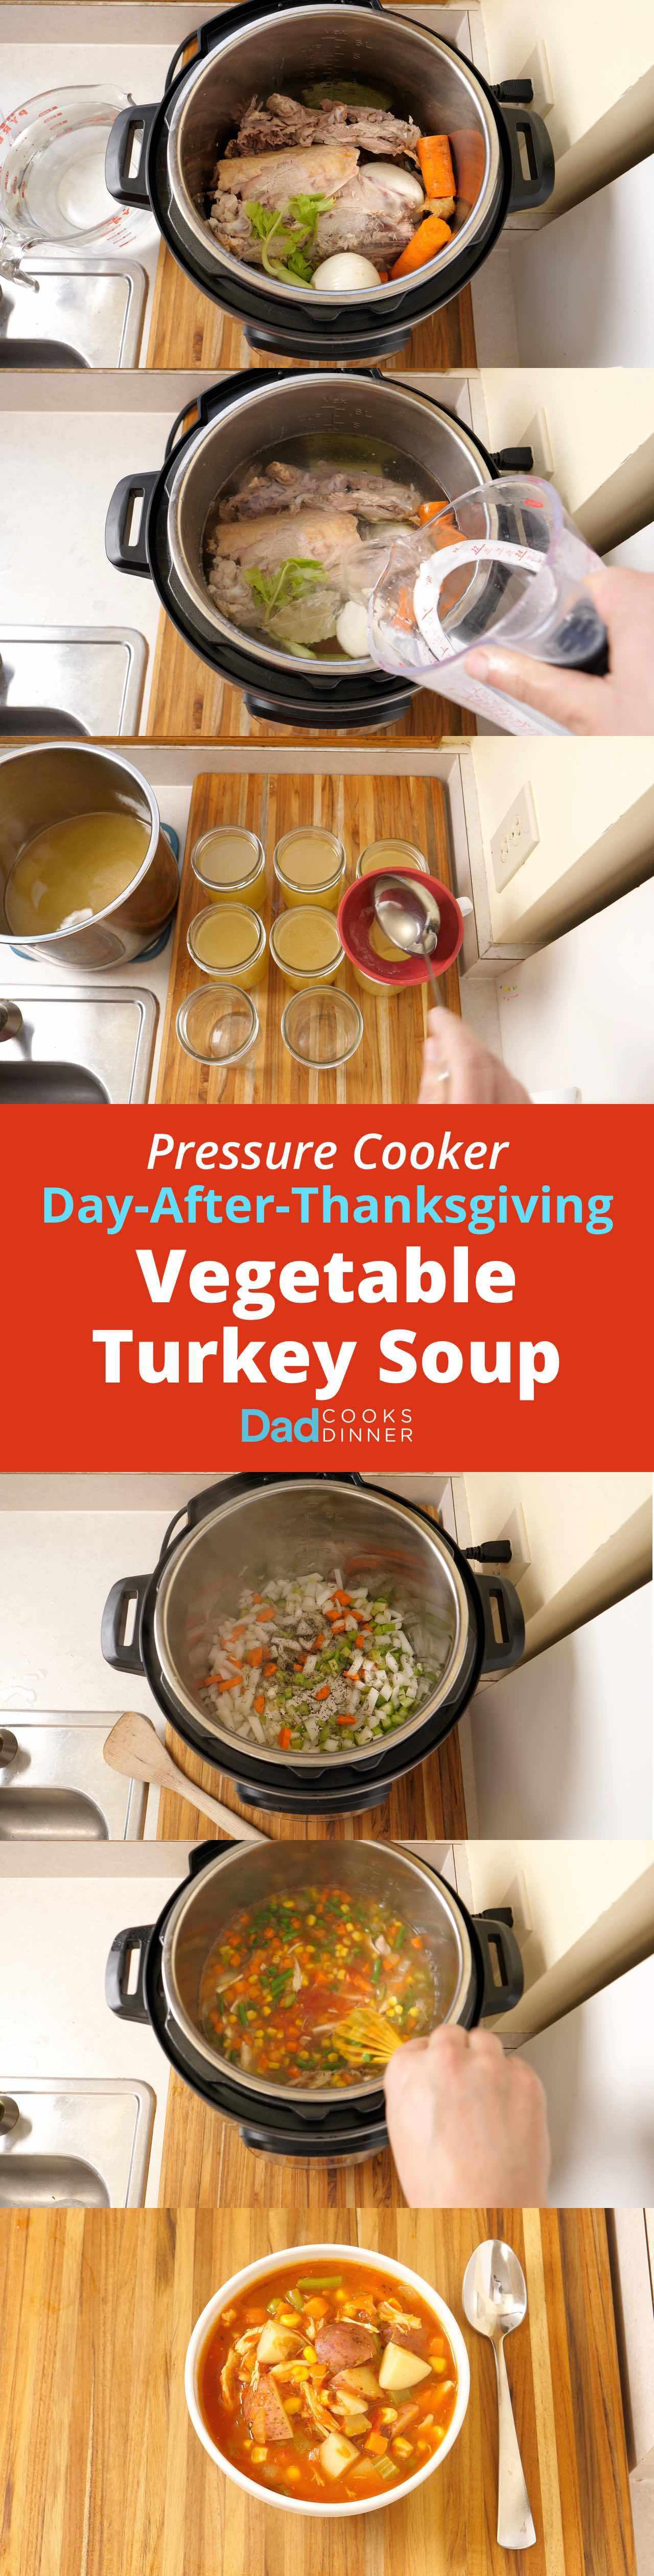 After Thanksgiving Turkey Soup
 Pressure Cooker Day After Thanksgiving Ve able Turkey